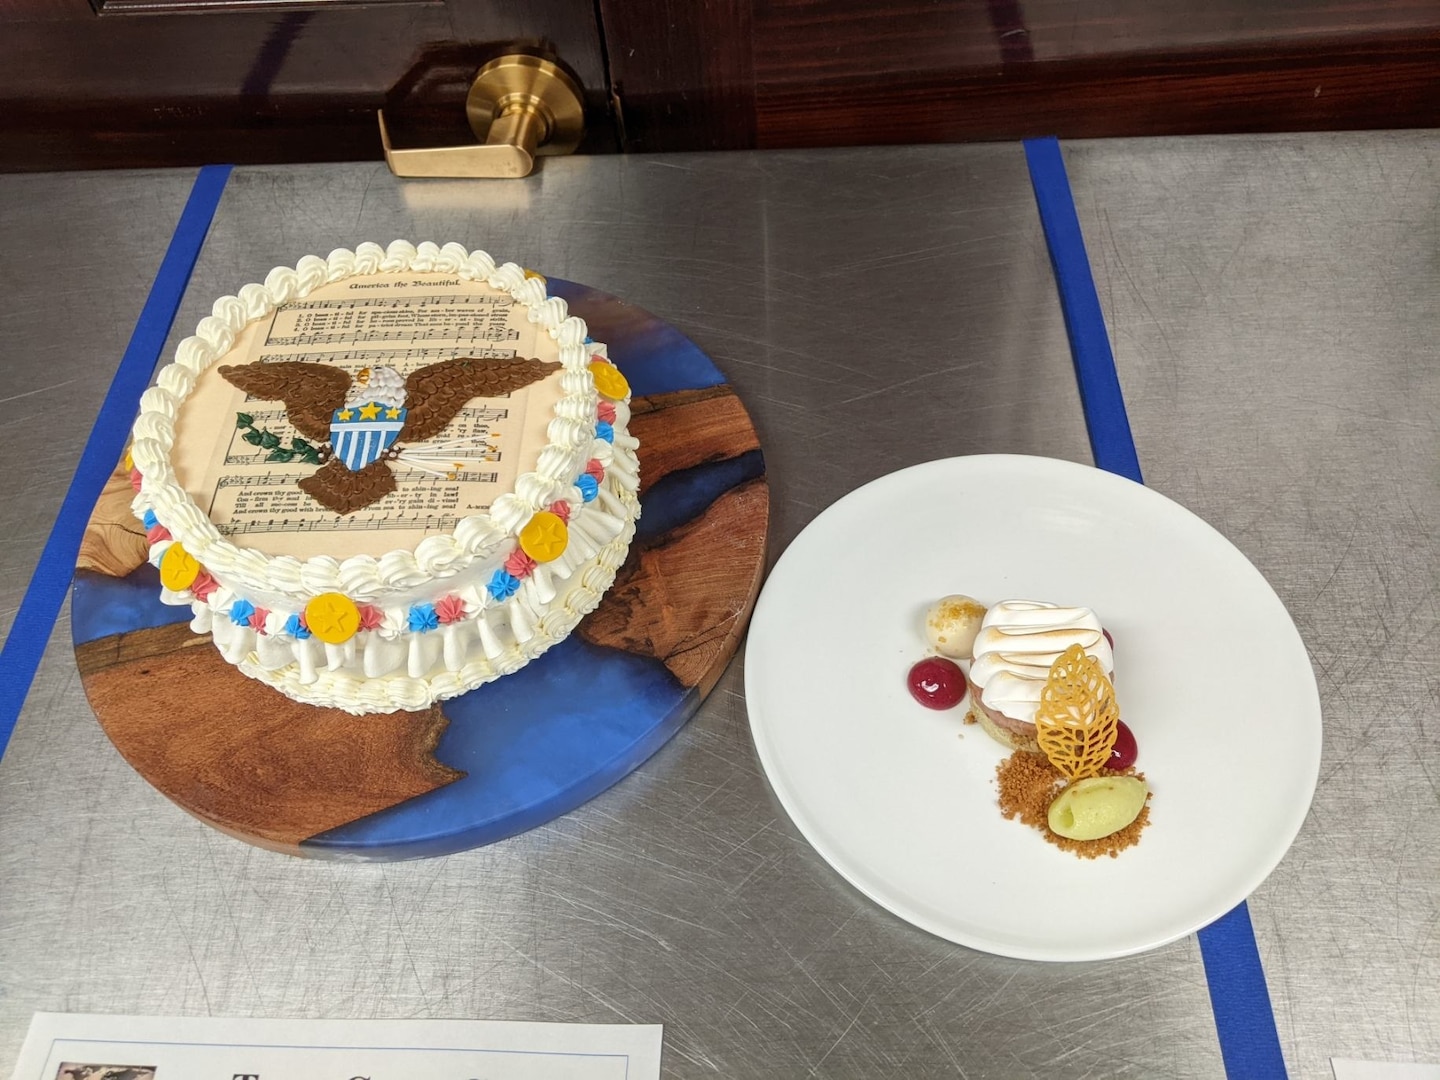 The winning pastry dishes, created by Chief Petty Officer Matthew Shaw, March 10, 2022. Shaw won the gold medal in the Military Pastry Chef of the Year category after creating celebration cake, named Vintage American, and four plates of the apple pie and cheese dish within three hours. USCG photo.